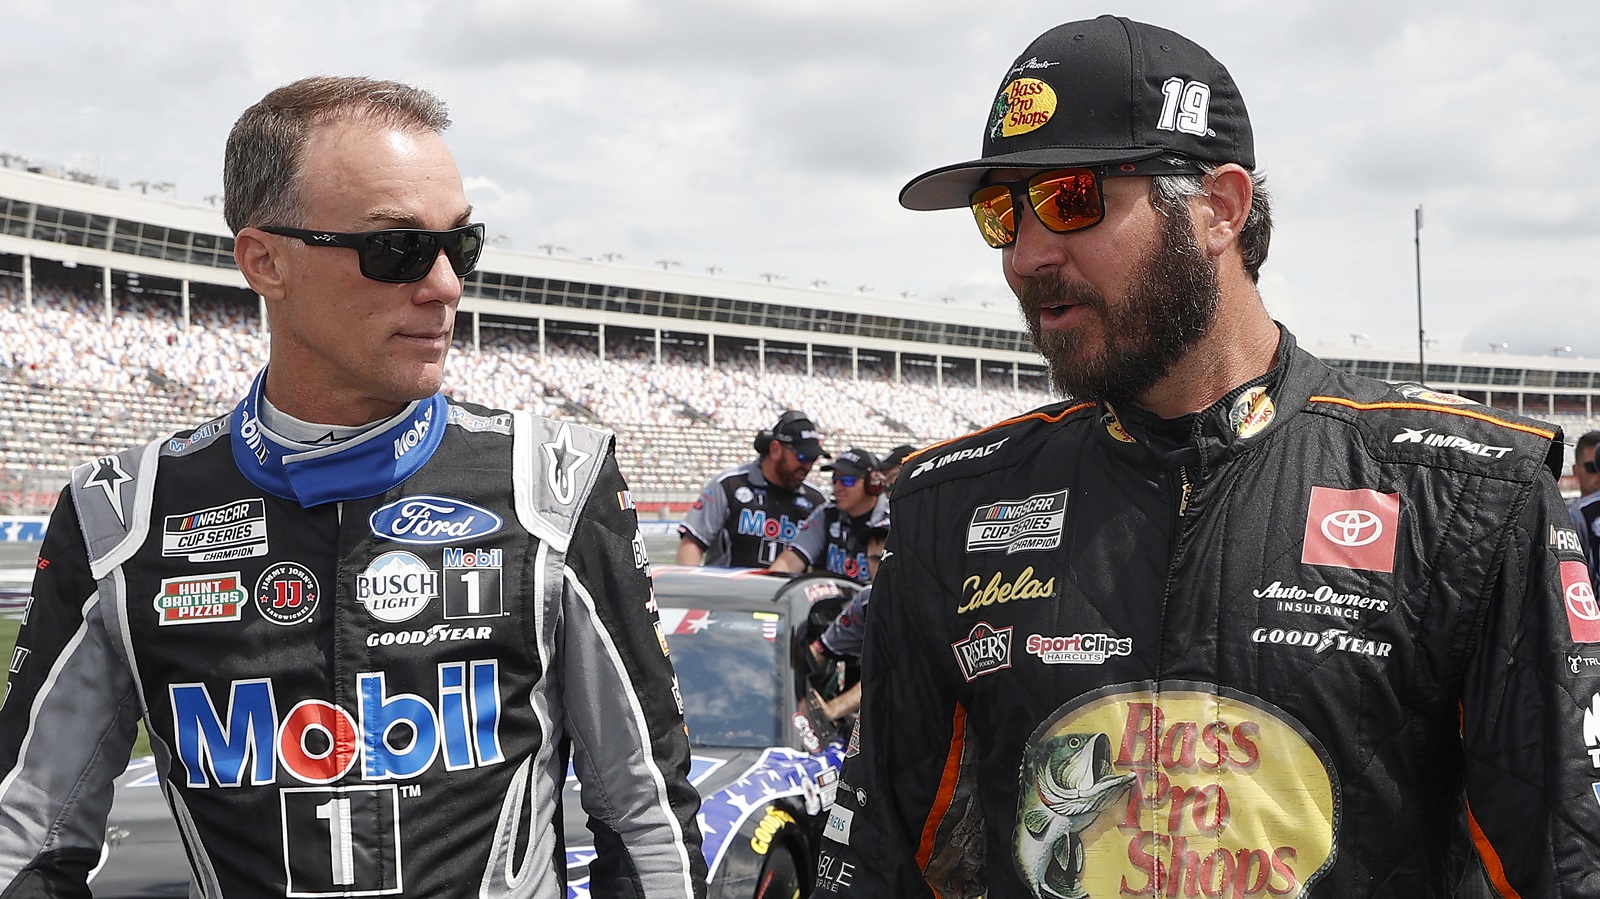 Kevin Harvick and Martin Truex Jr. walk the grid during qualifying for the NASCAR Cup Series Coca-Cola 600 at Charlotte Motor Speedway on May 29, 2021. | Maddie Meyer/Getty Images